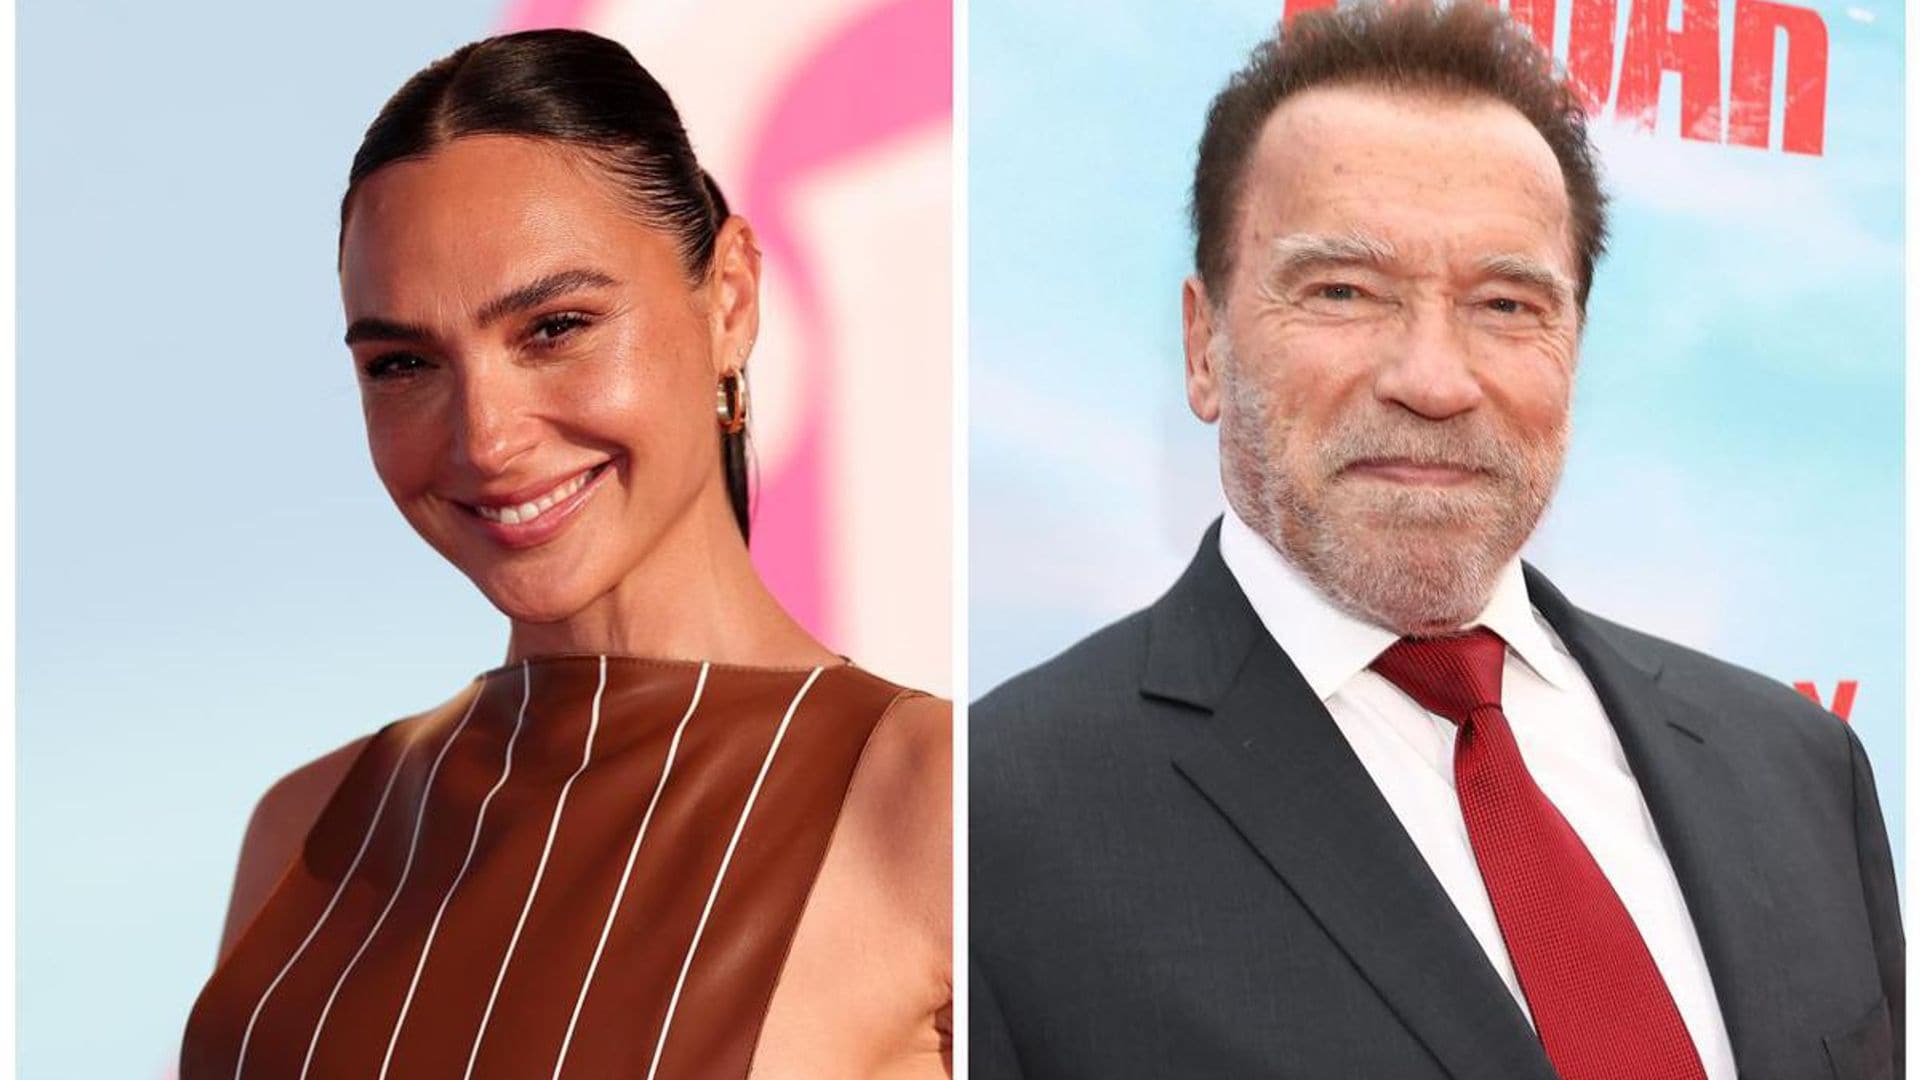 Gal Gadot gets some action advice from Arnold Schwarzenegger